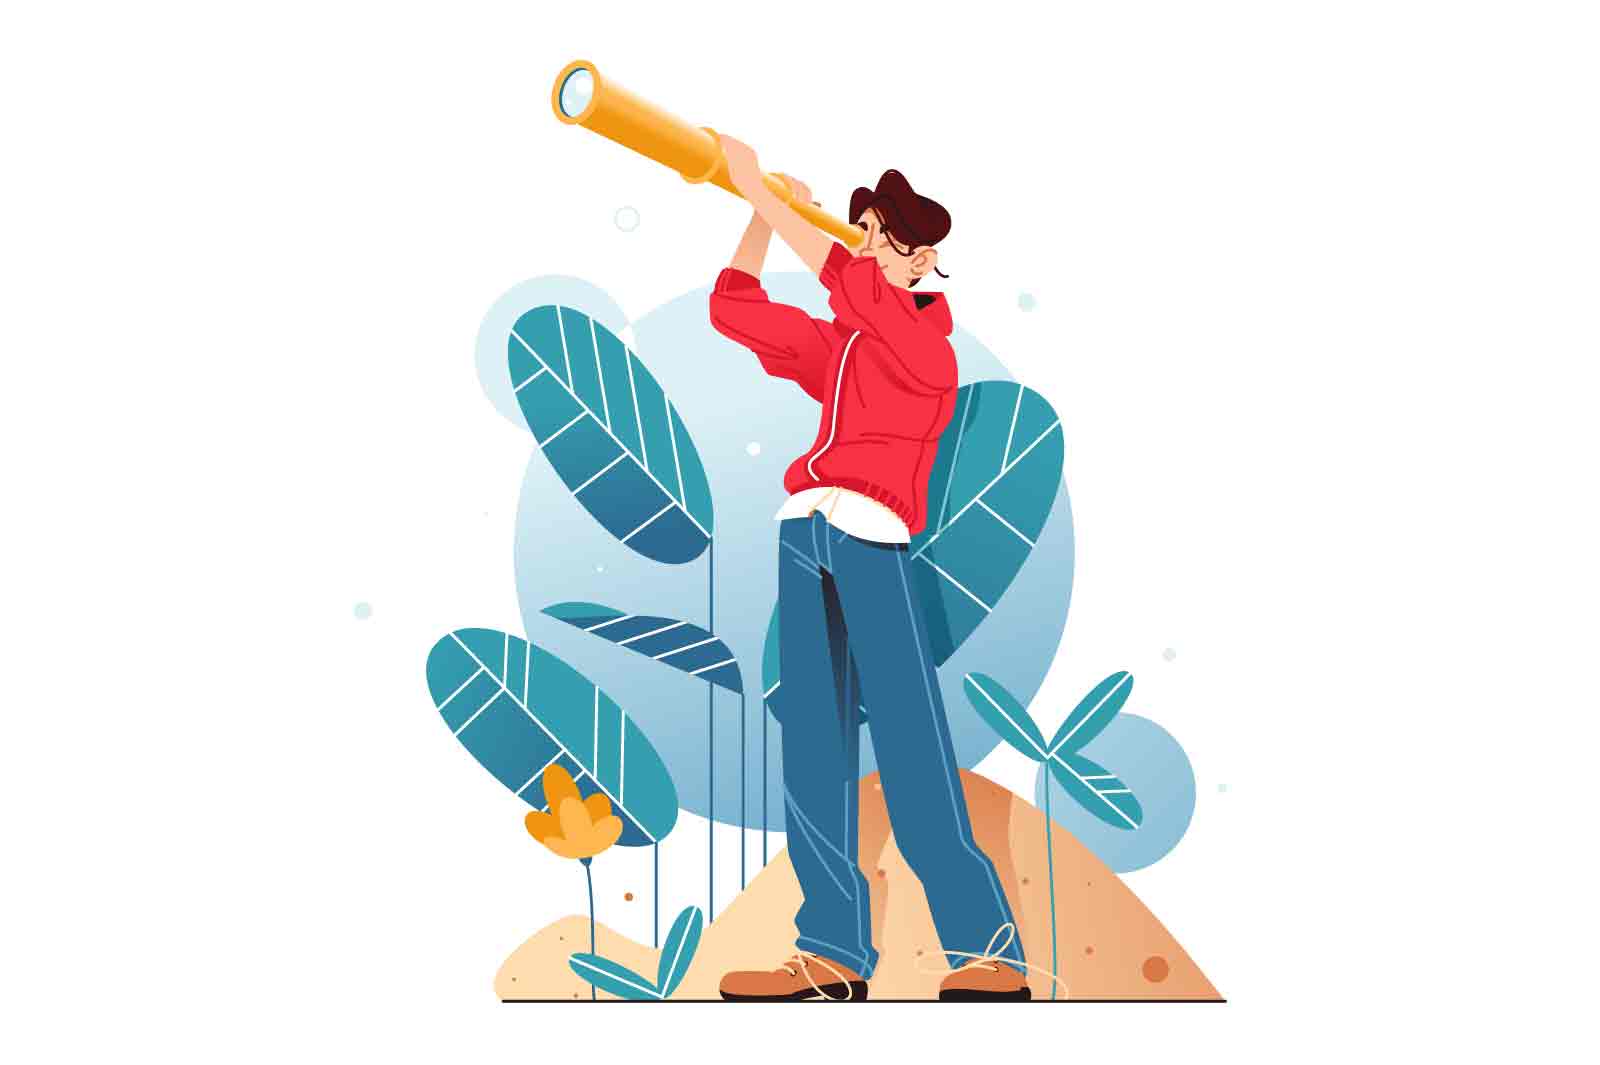 Guy holds telescope, searching for someone or something, Vector illustration. Exploration and discovery concept.